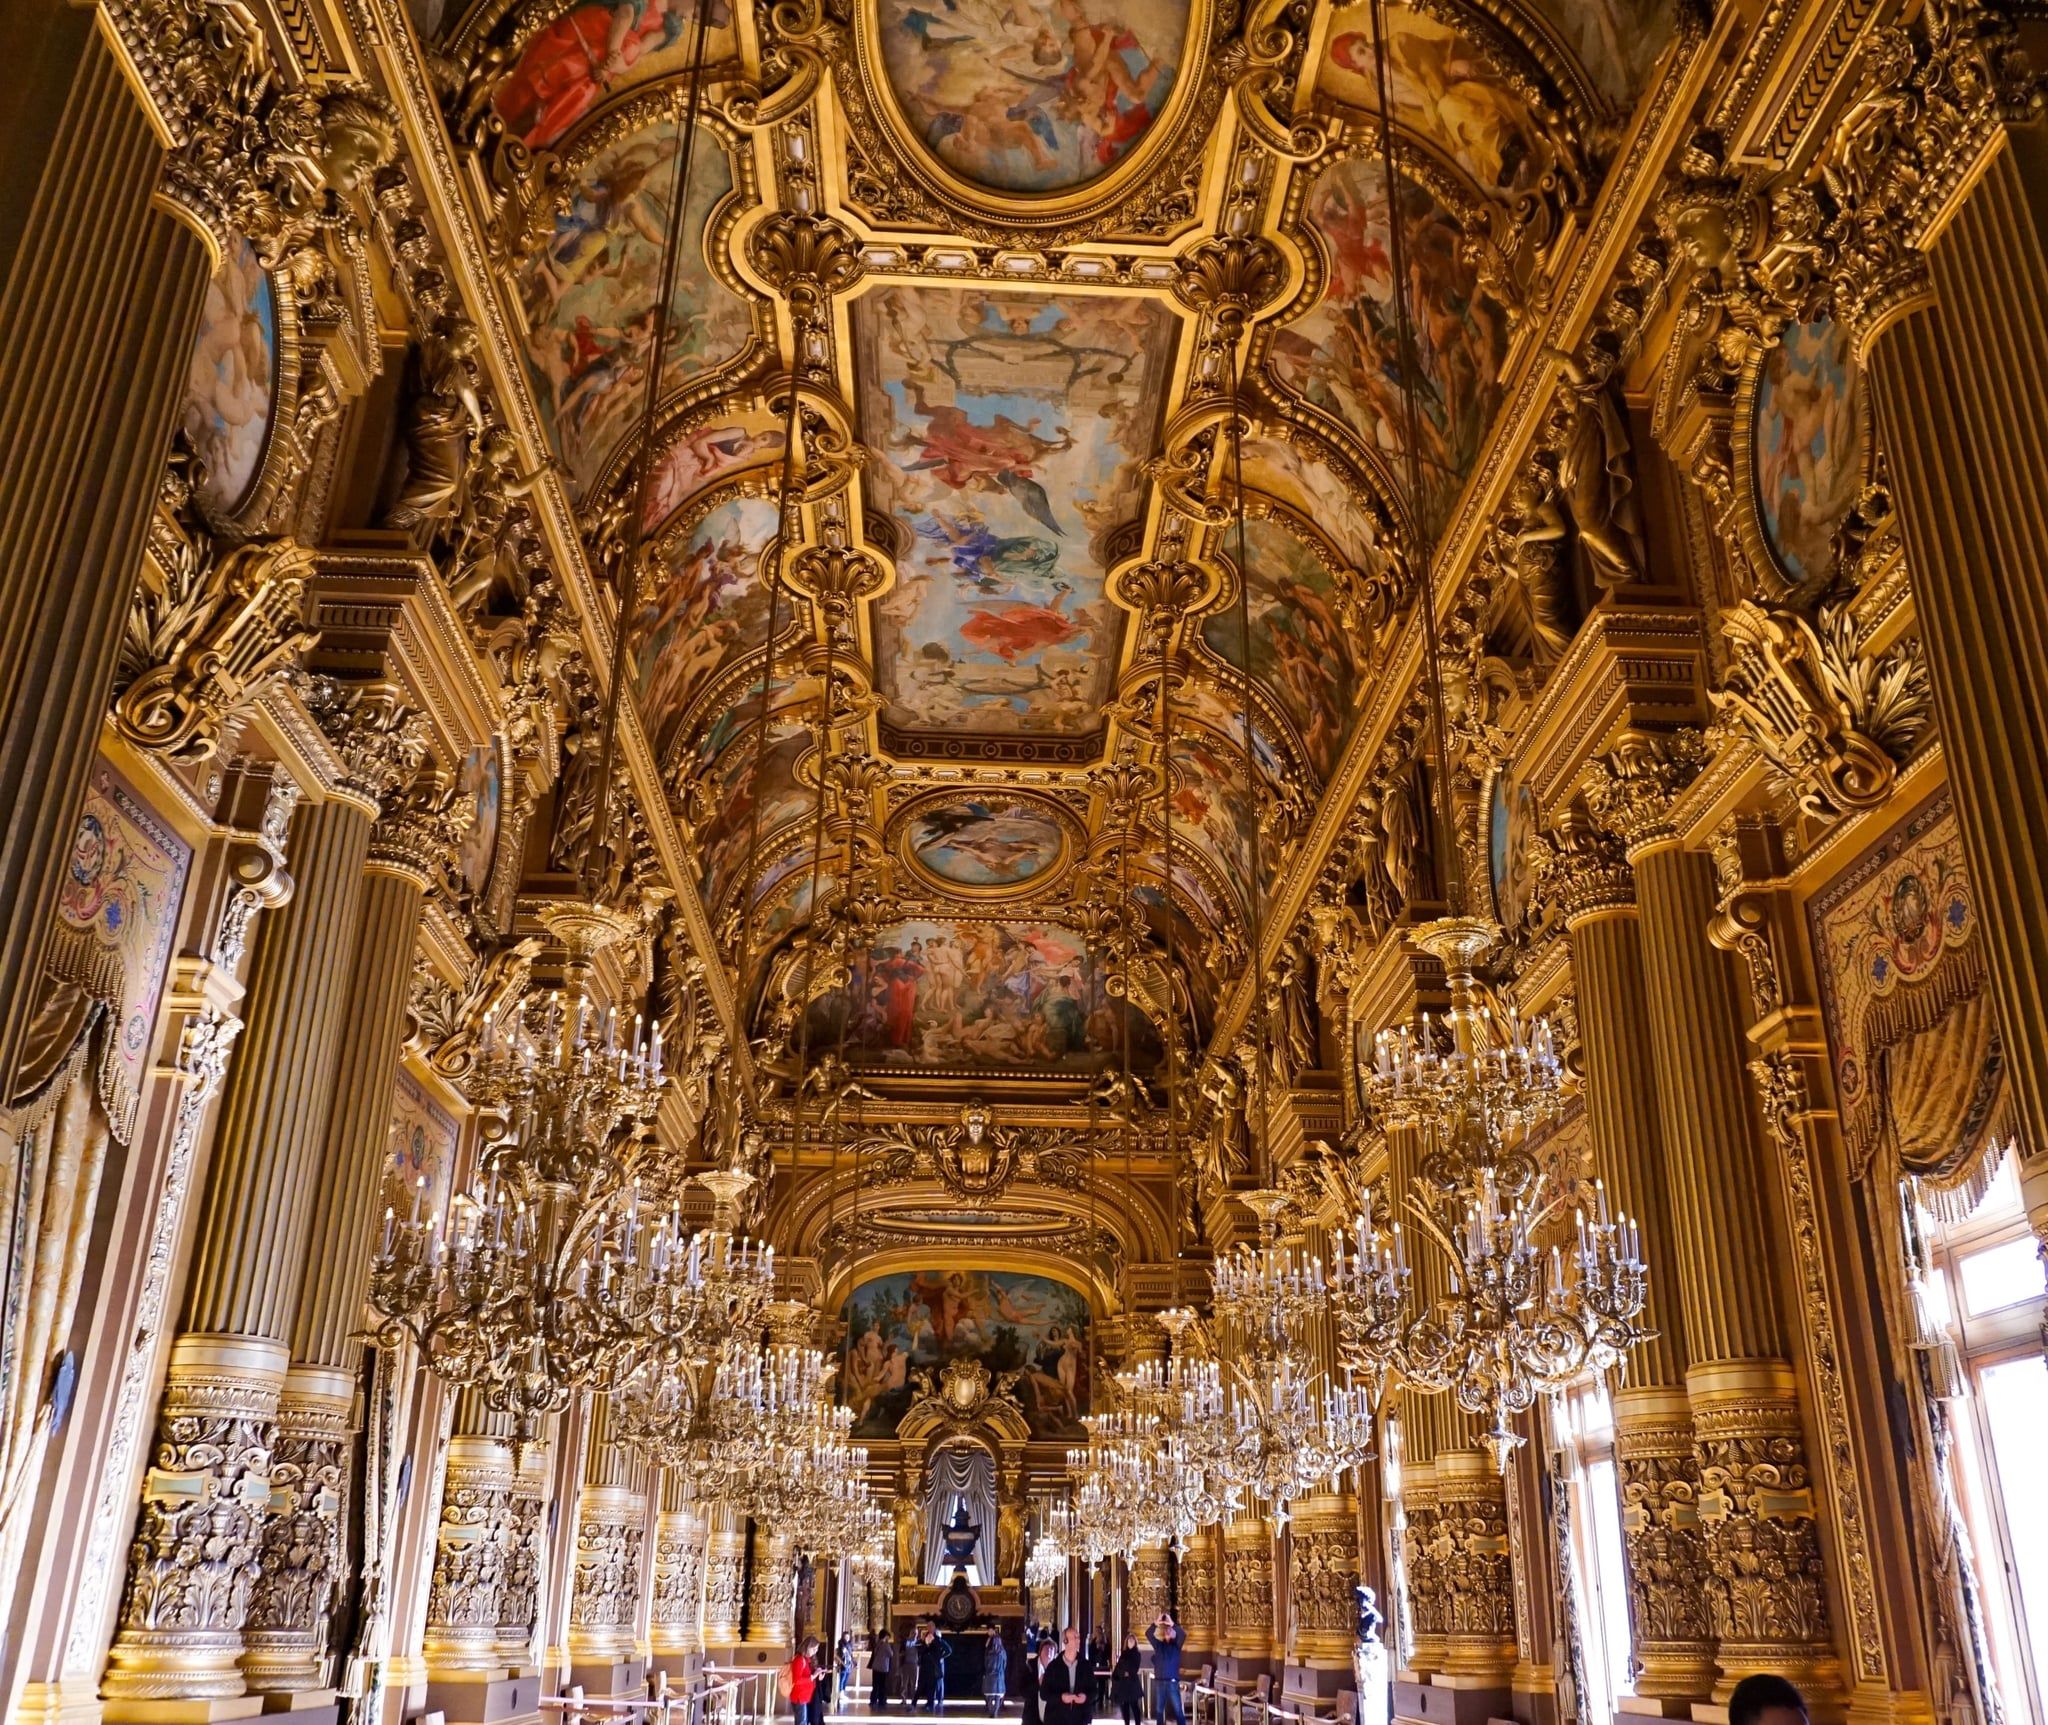 The inside of the Opera Garnier in Paris, with ornate gold and blue ceiling and chandeliers. - Castle, royalcore